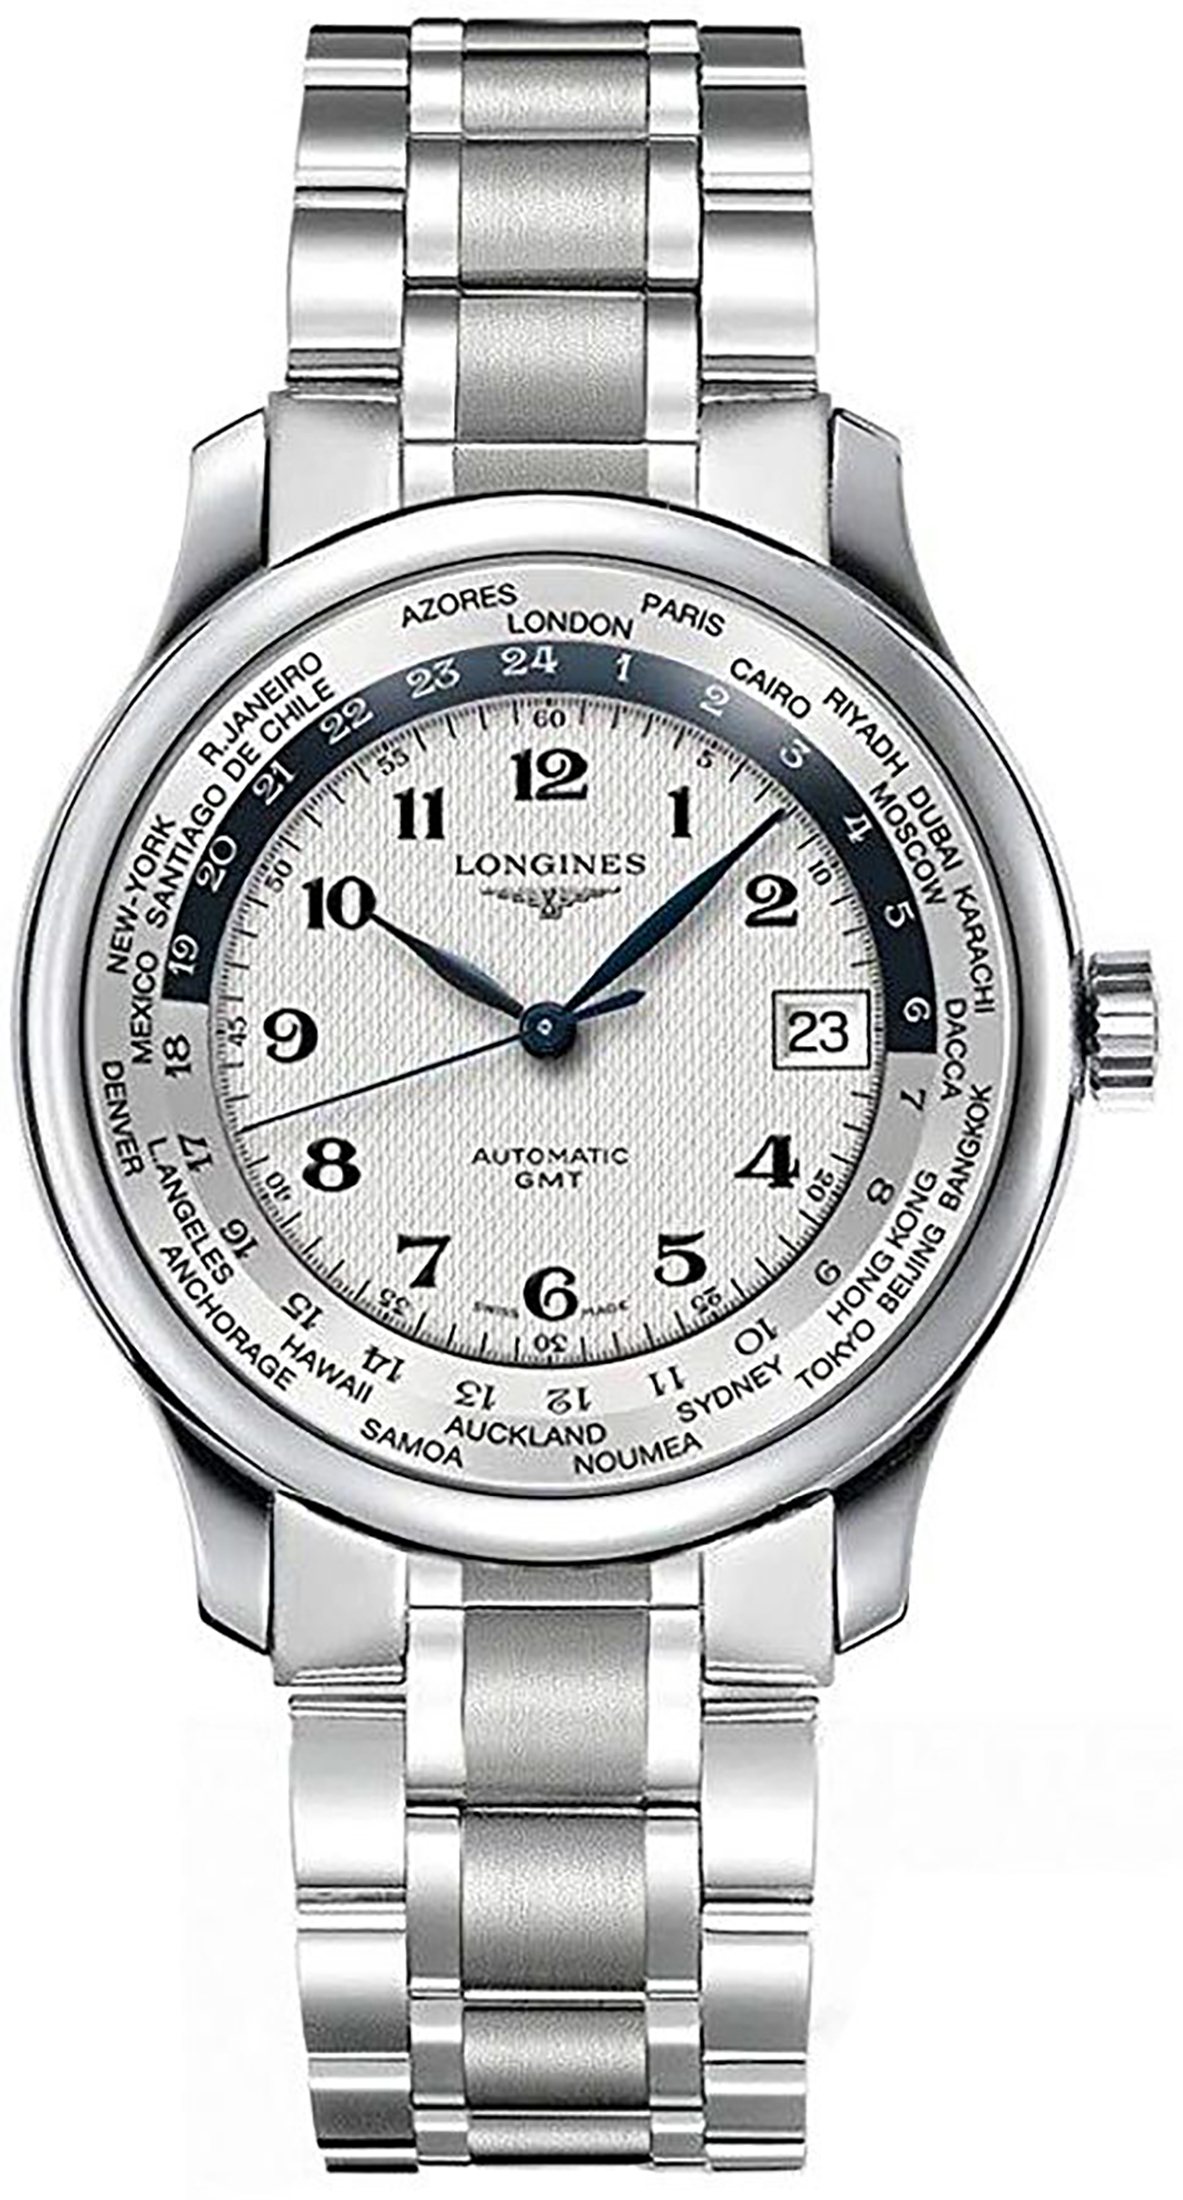 Longines Master Collection Silver Dial Men's Watch L2.631.4.70.6 - image 1 of 4